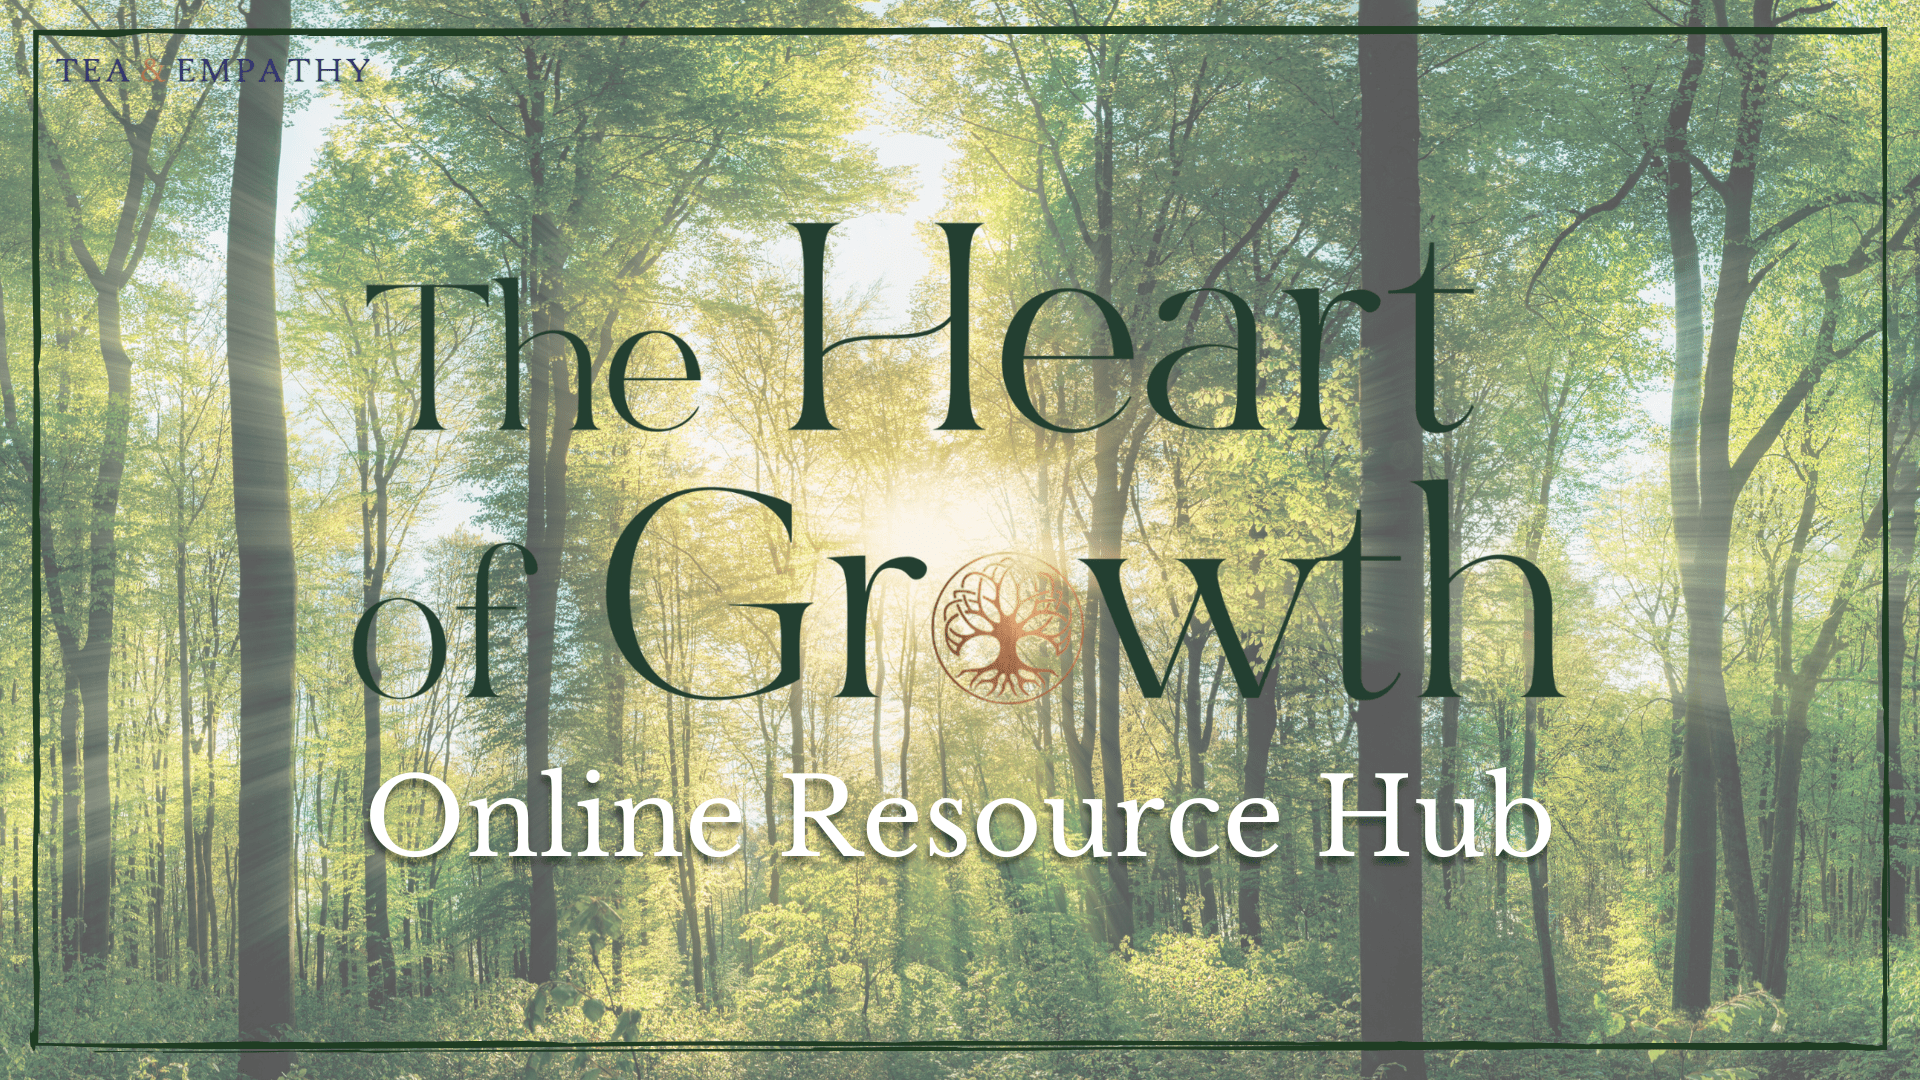 The Heart of Growth online resource hub